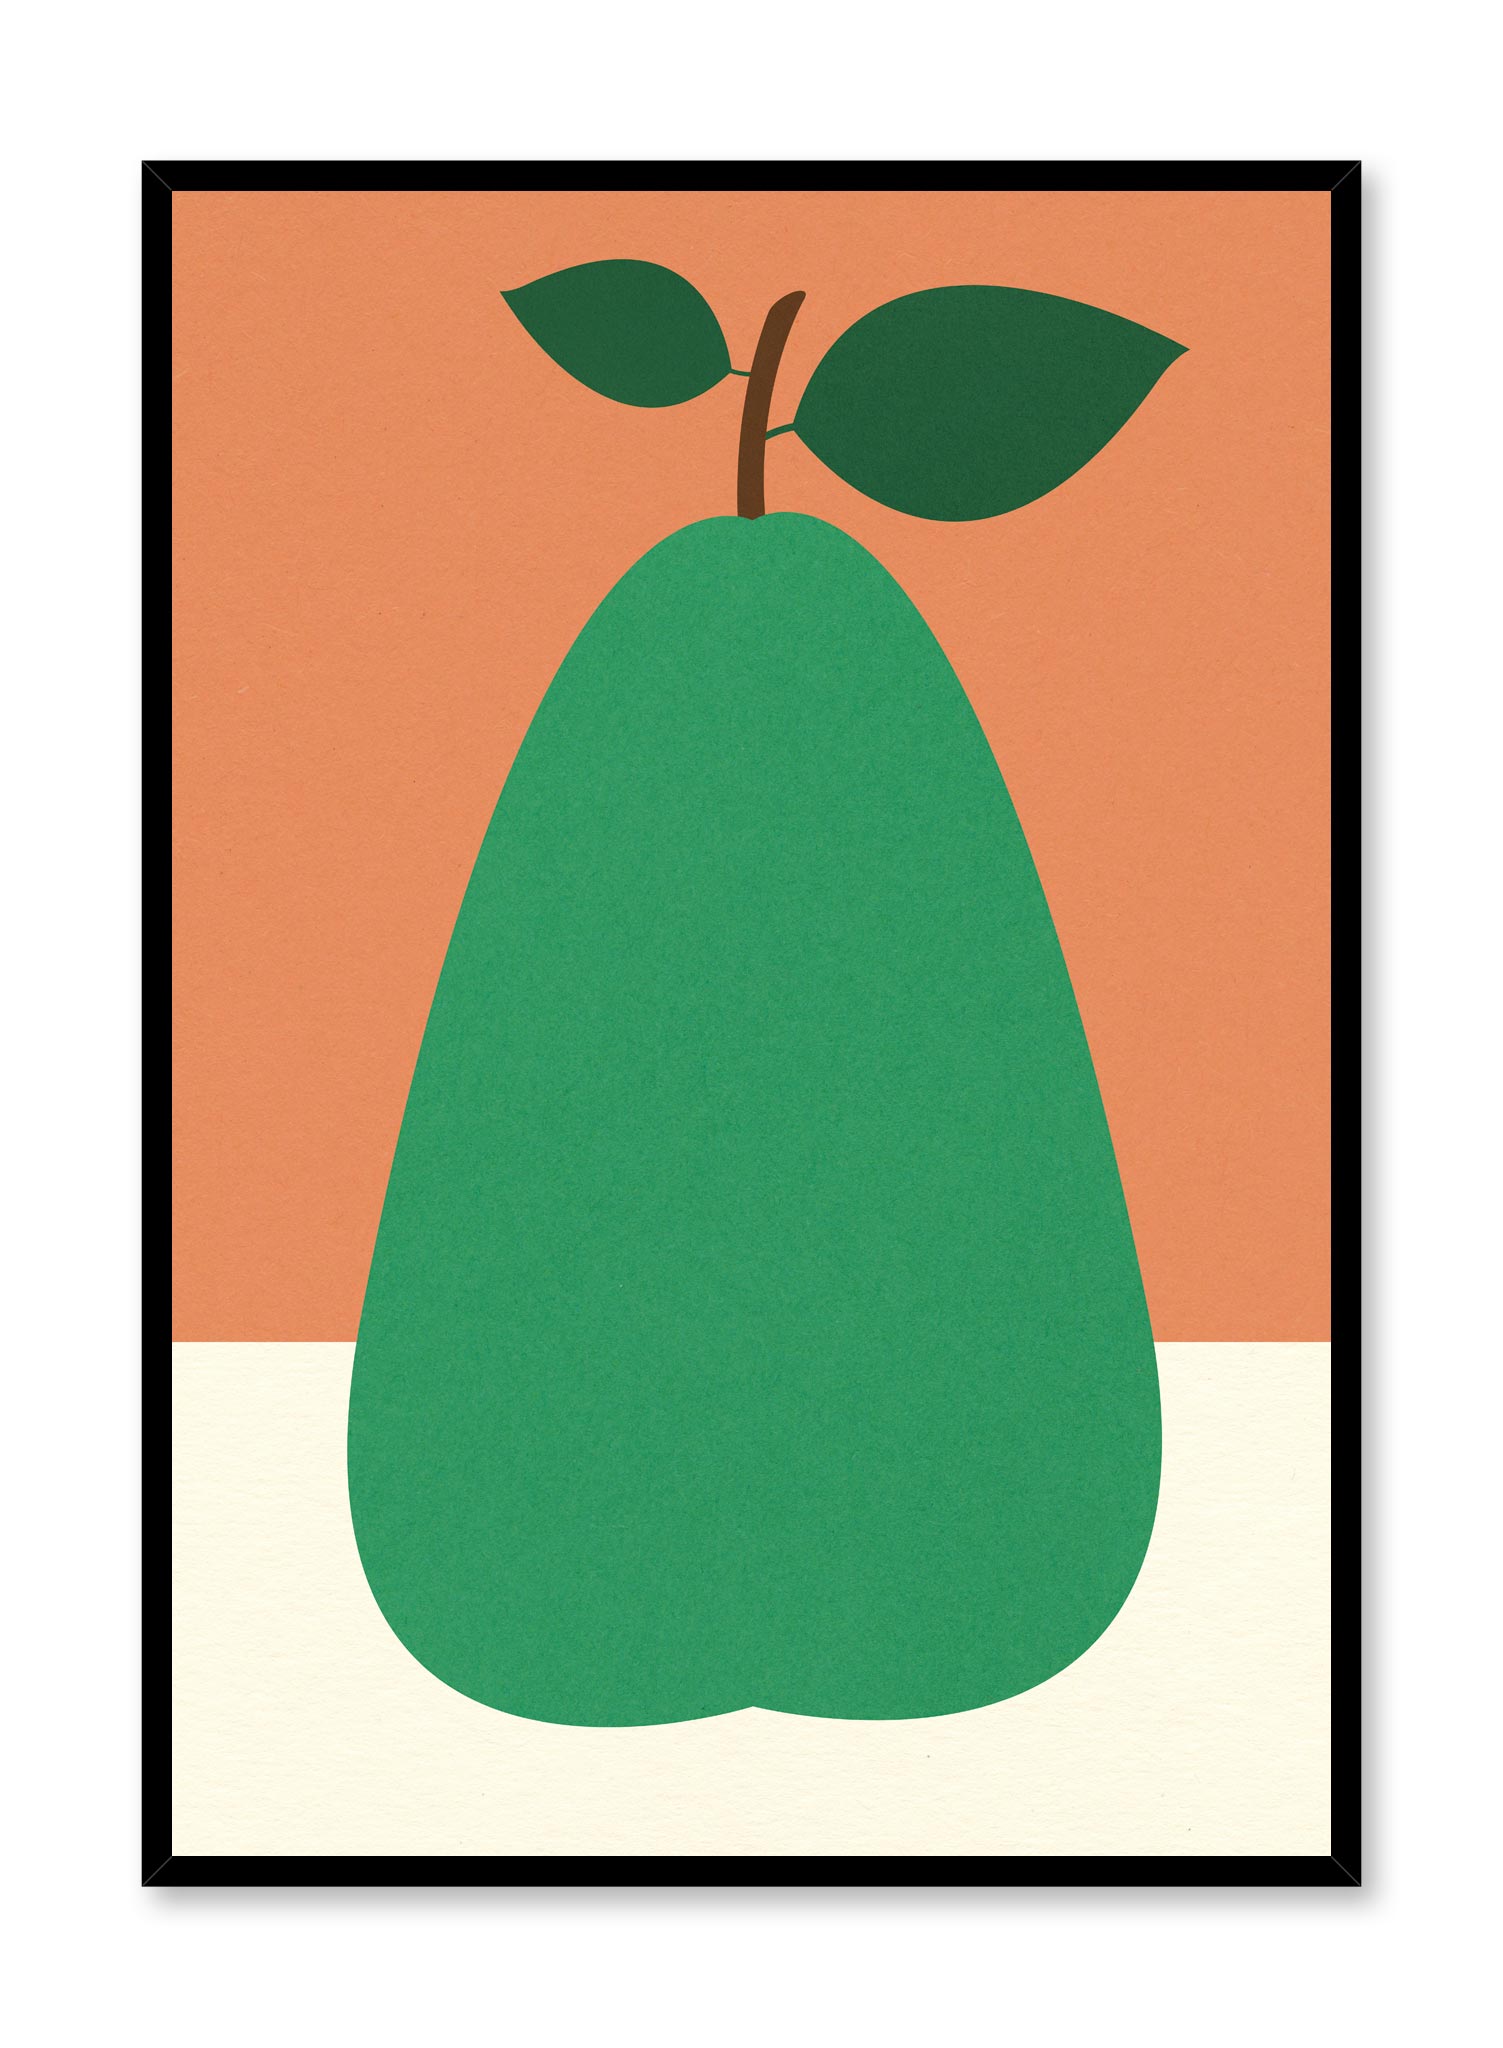 Modern minimalist poster by Opposite Wall with collage illustration of green pear